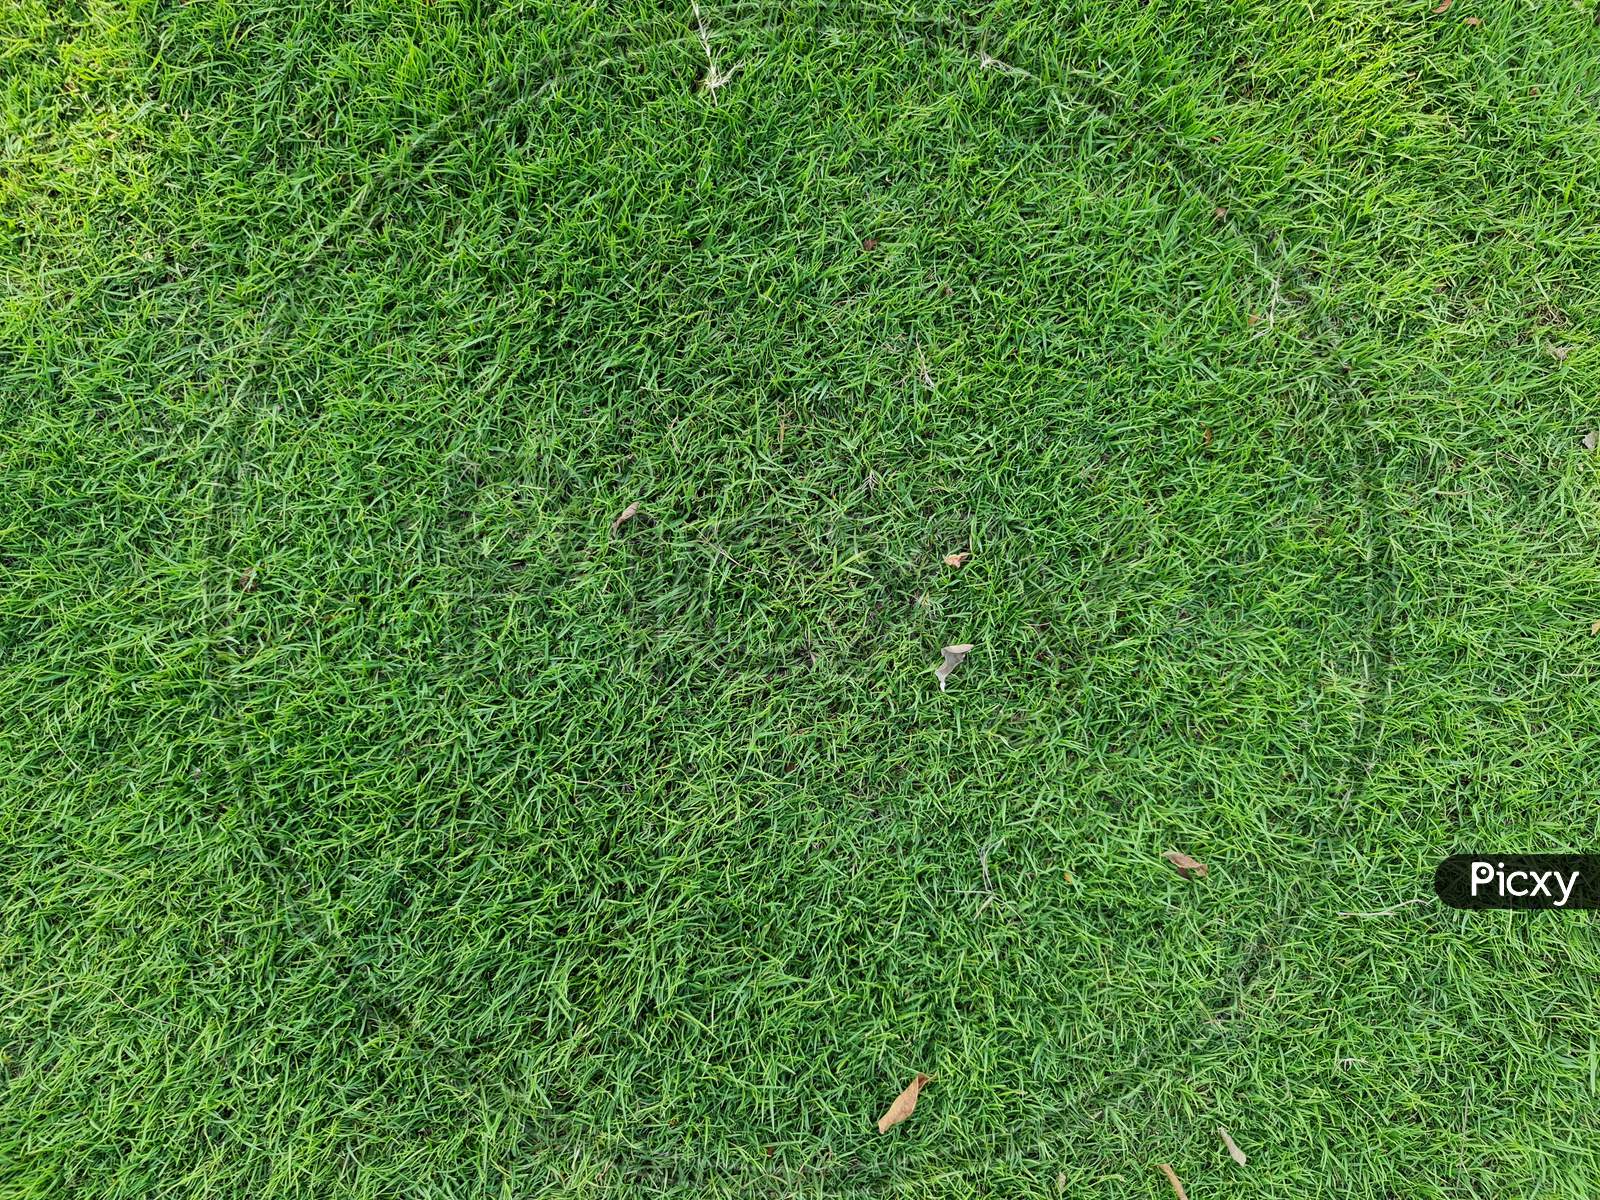 Natural Green Grass Seamless Texture Tile. Grass Lawn From Top View. Good For Background And Architectural 3D Rendering.